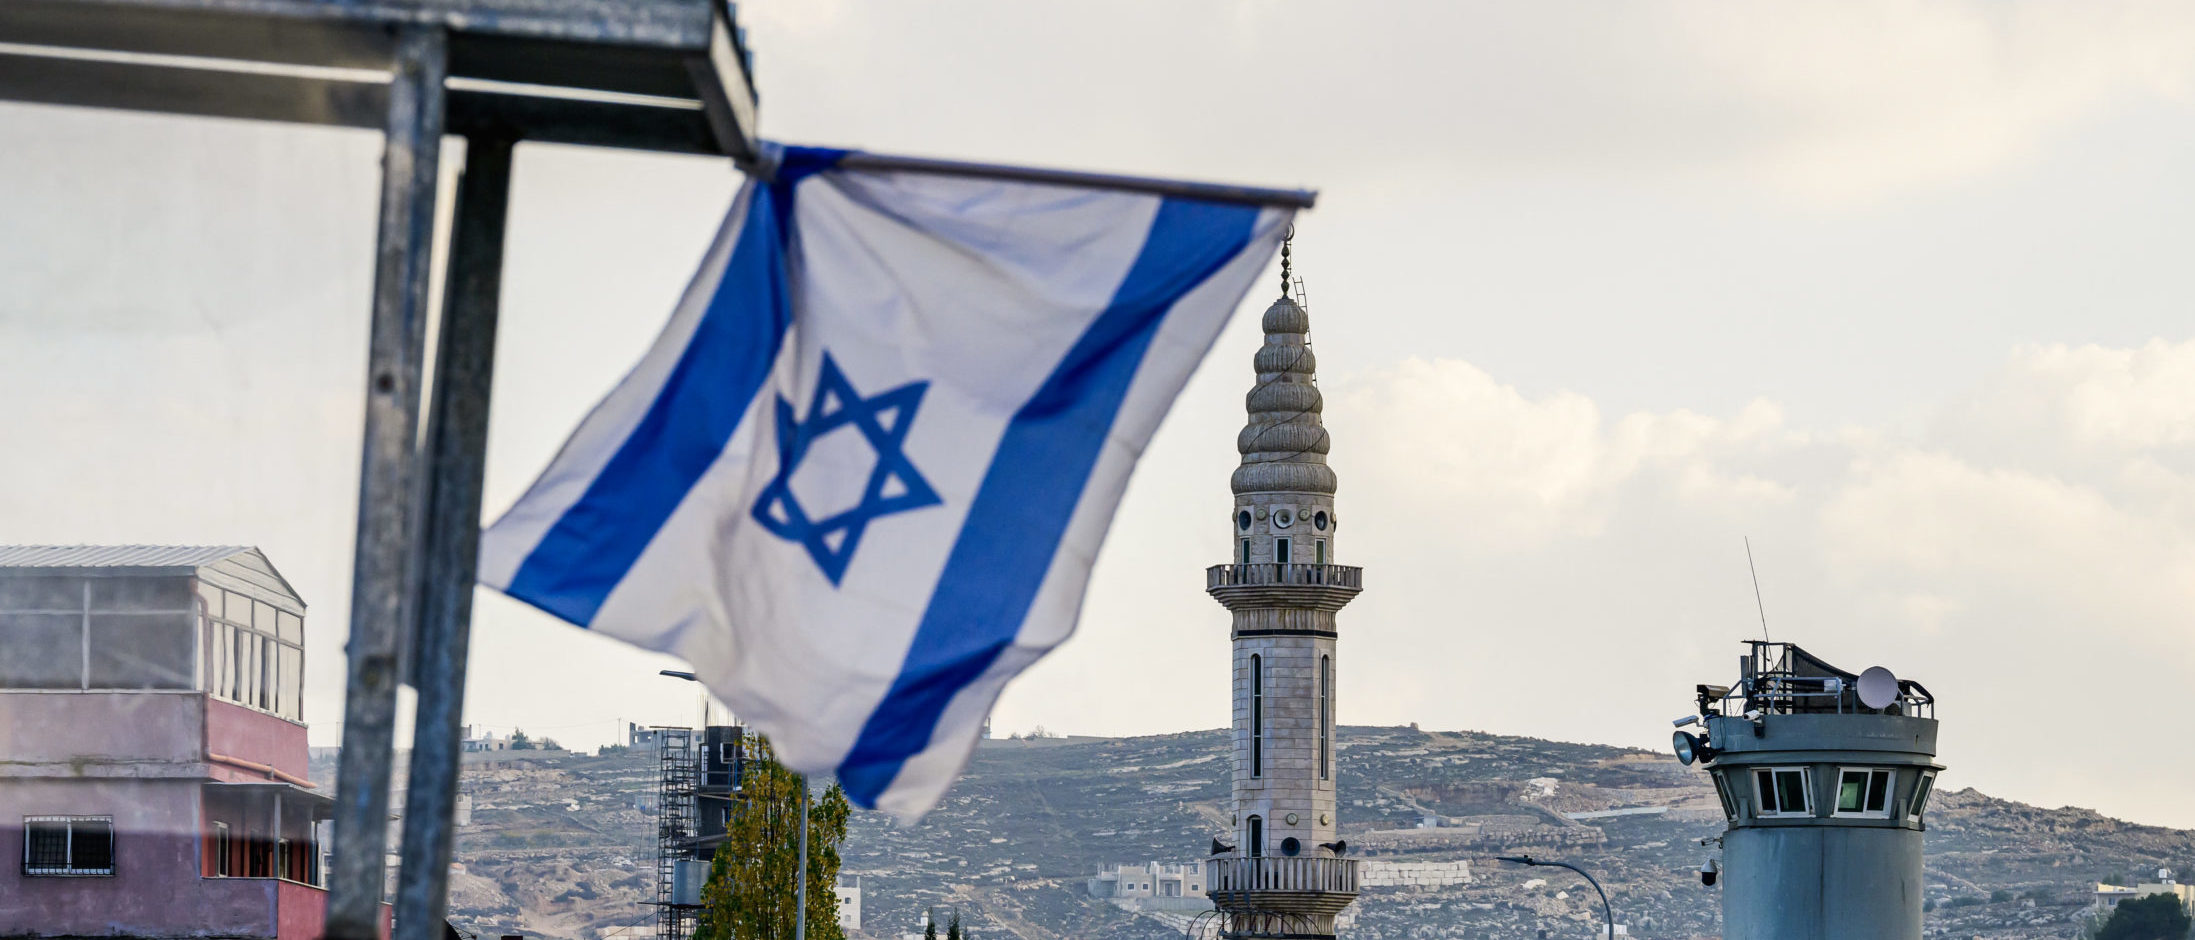 Teacher Allegedly Has Violent Response To Student Finding Israeli Flag Offensive